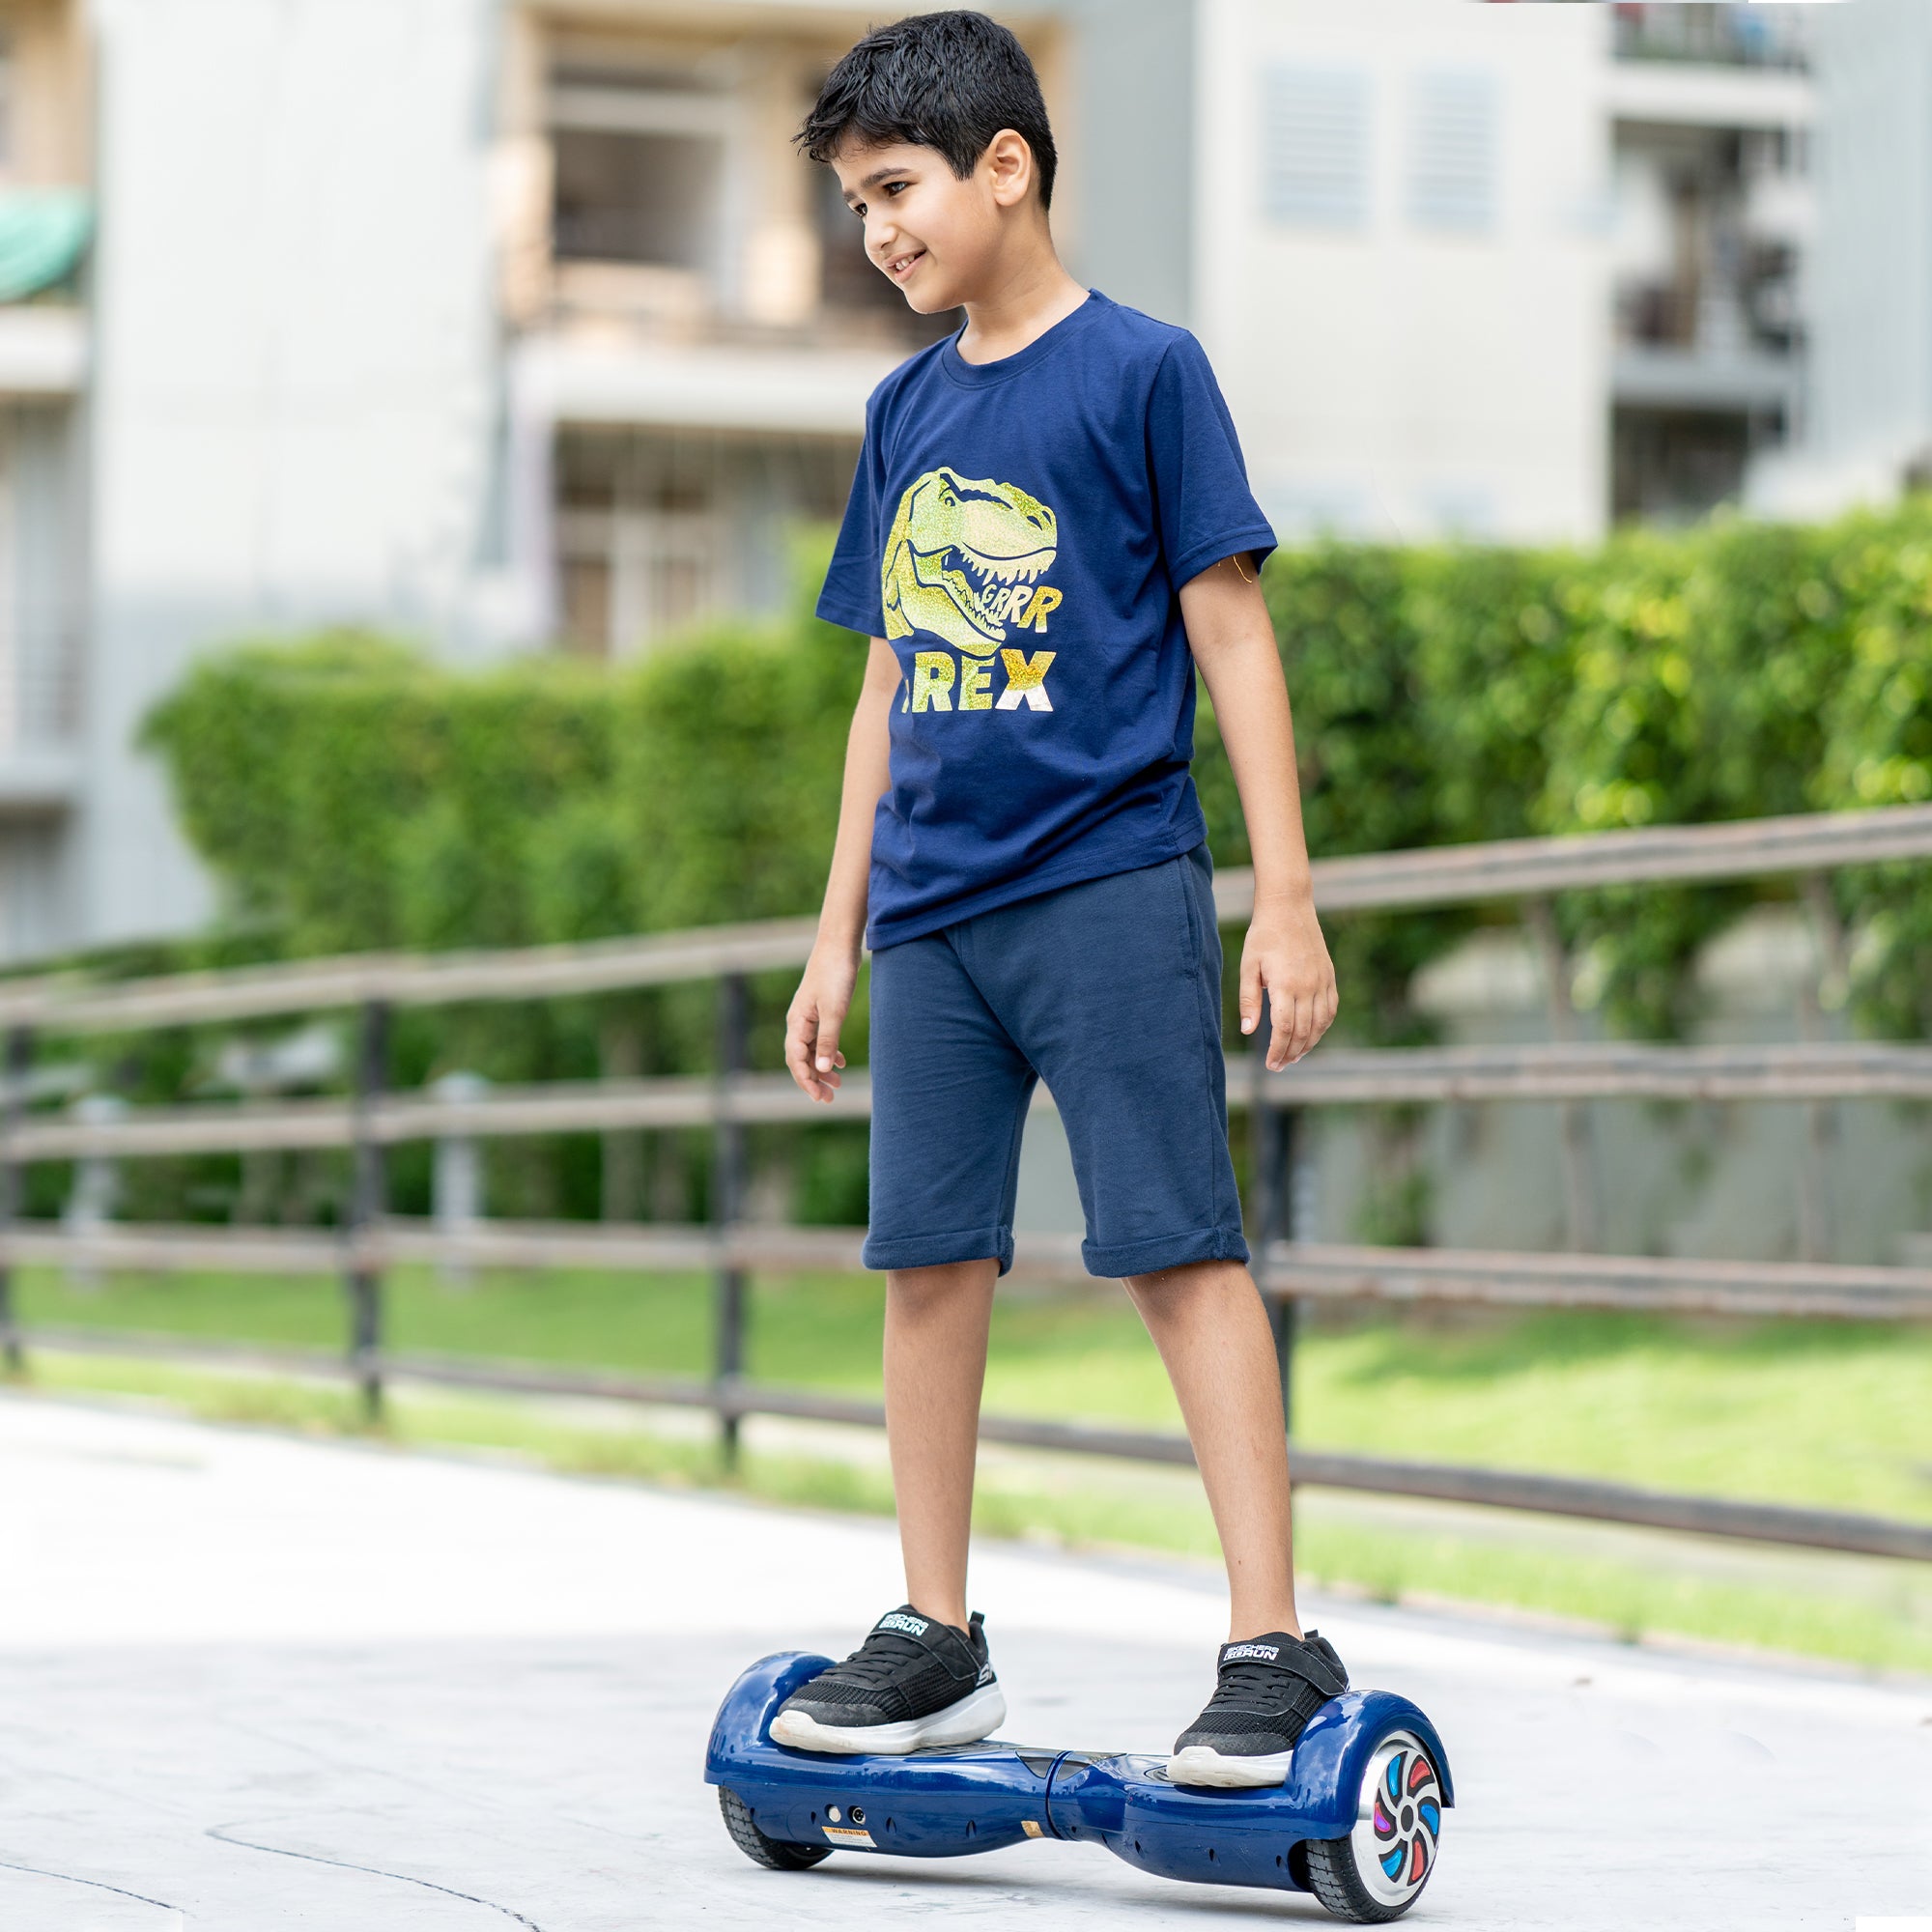 Tygatec T1 ECO - Self Balancing Electric Hoverboard (Blue Color)